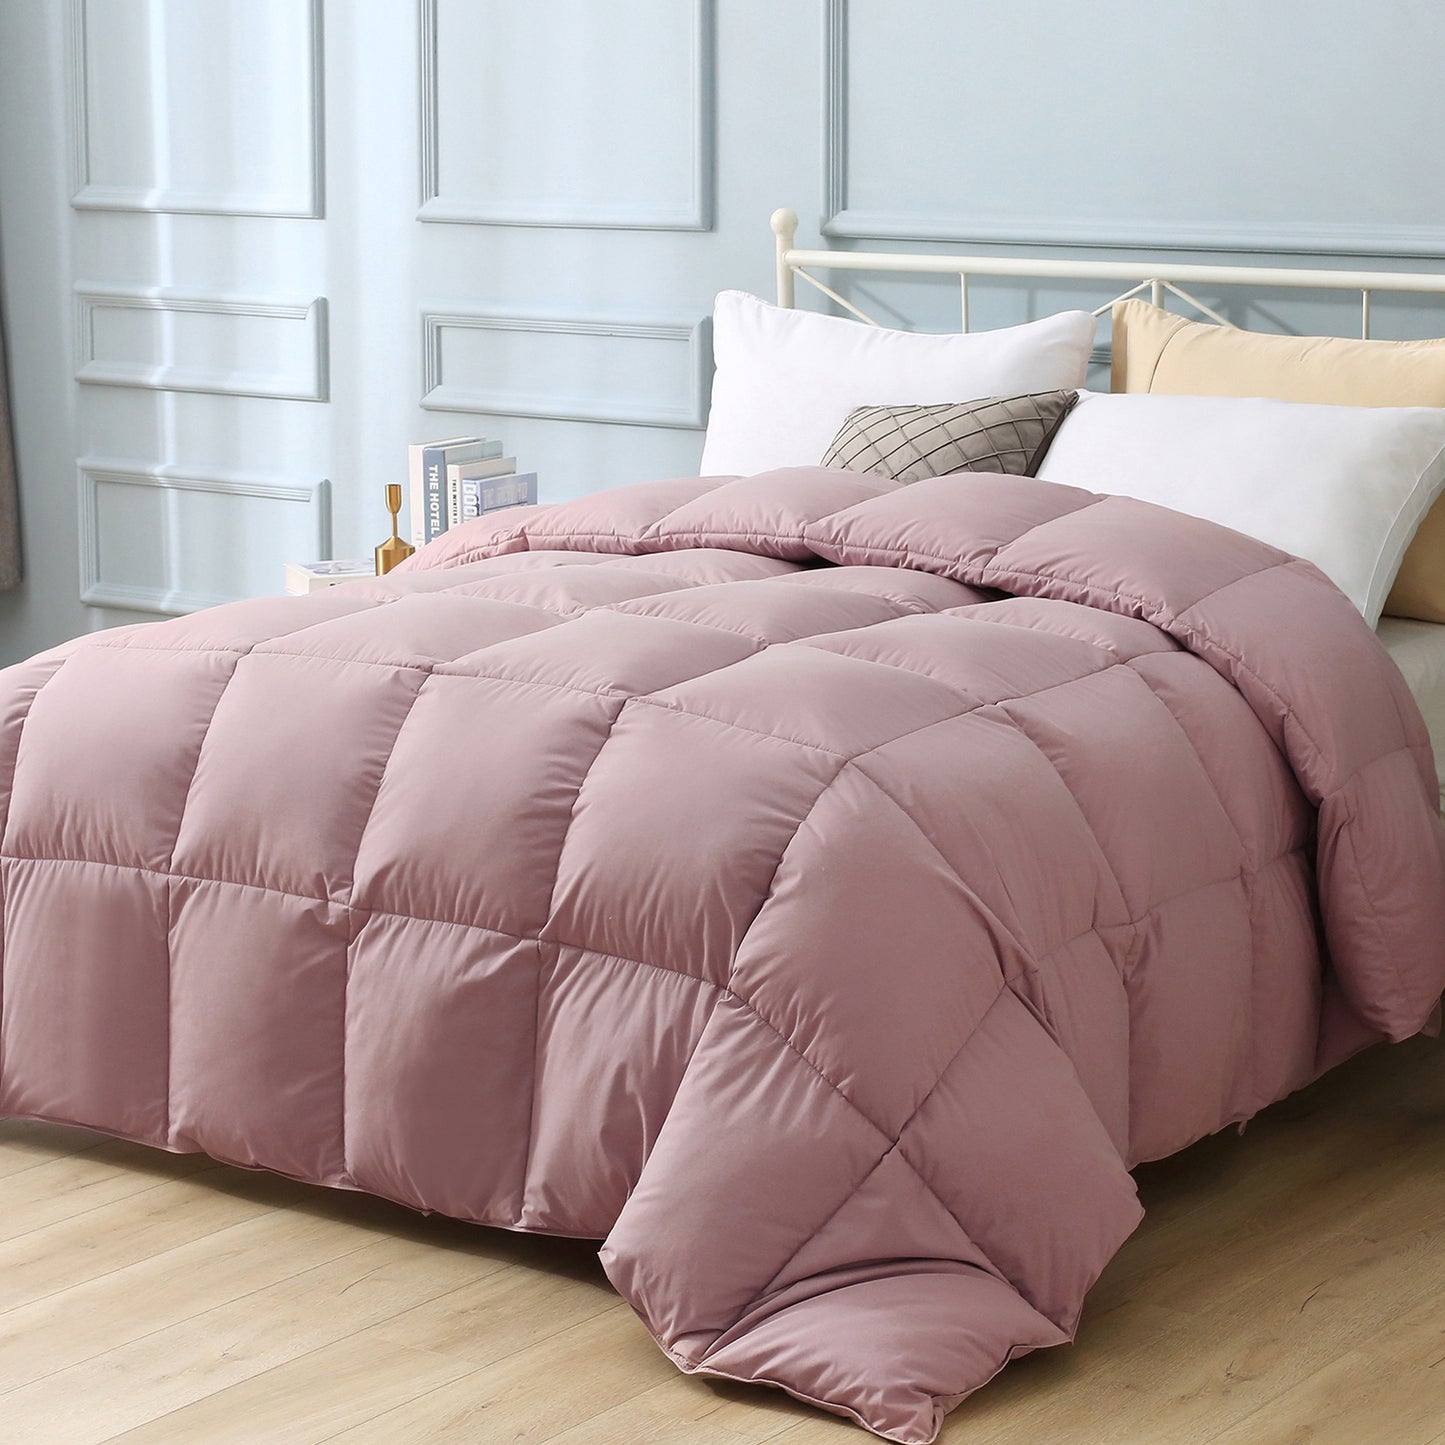 Hotel Collection Goose Feathers Down Comforter, Ultra-Soft Fluffy All Season Duvet Insert, Multi-color Available